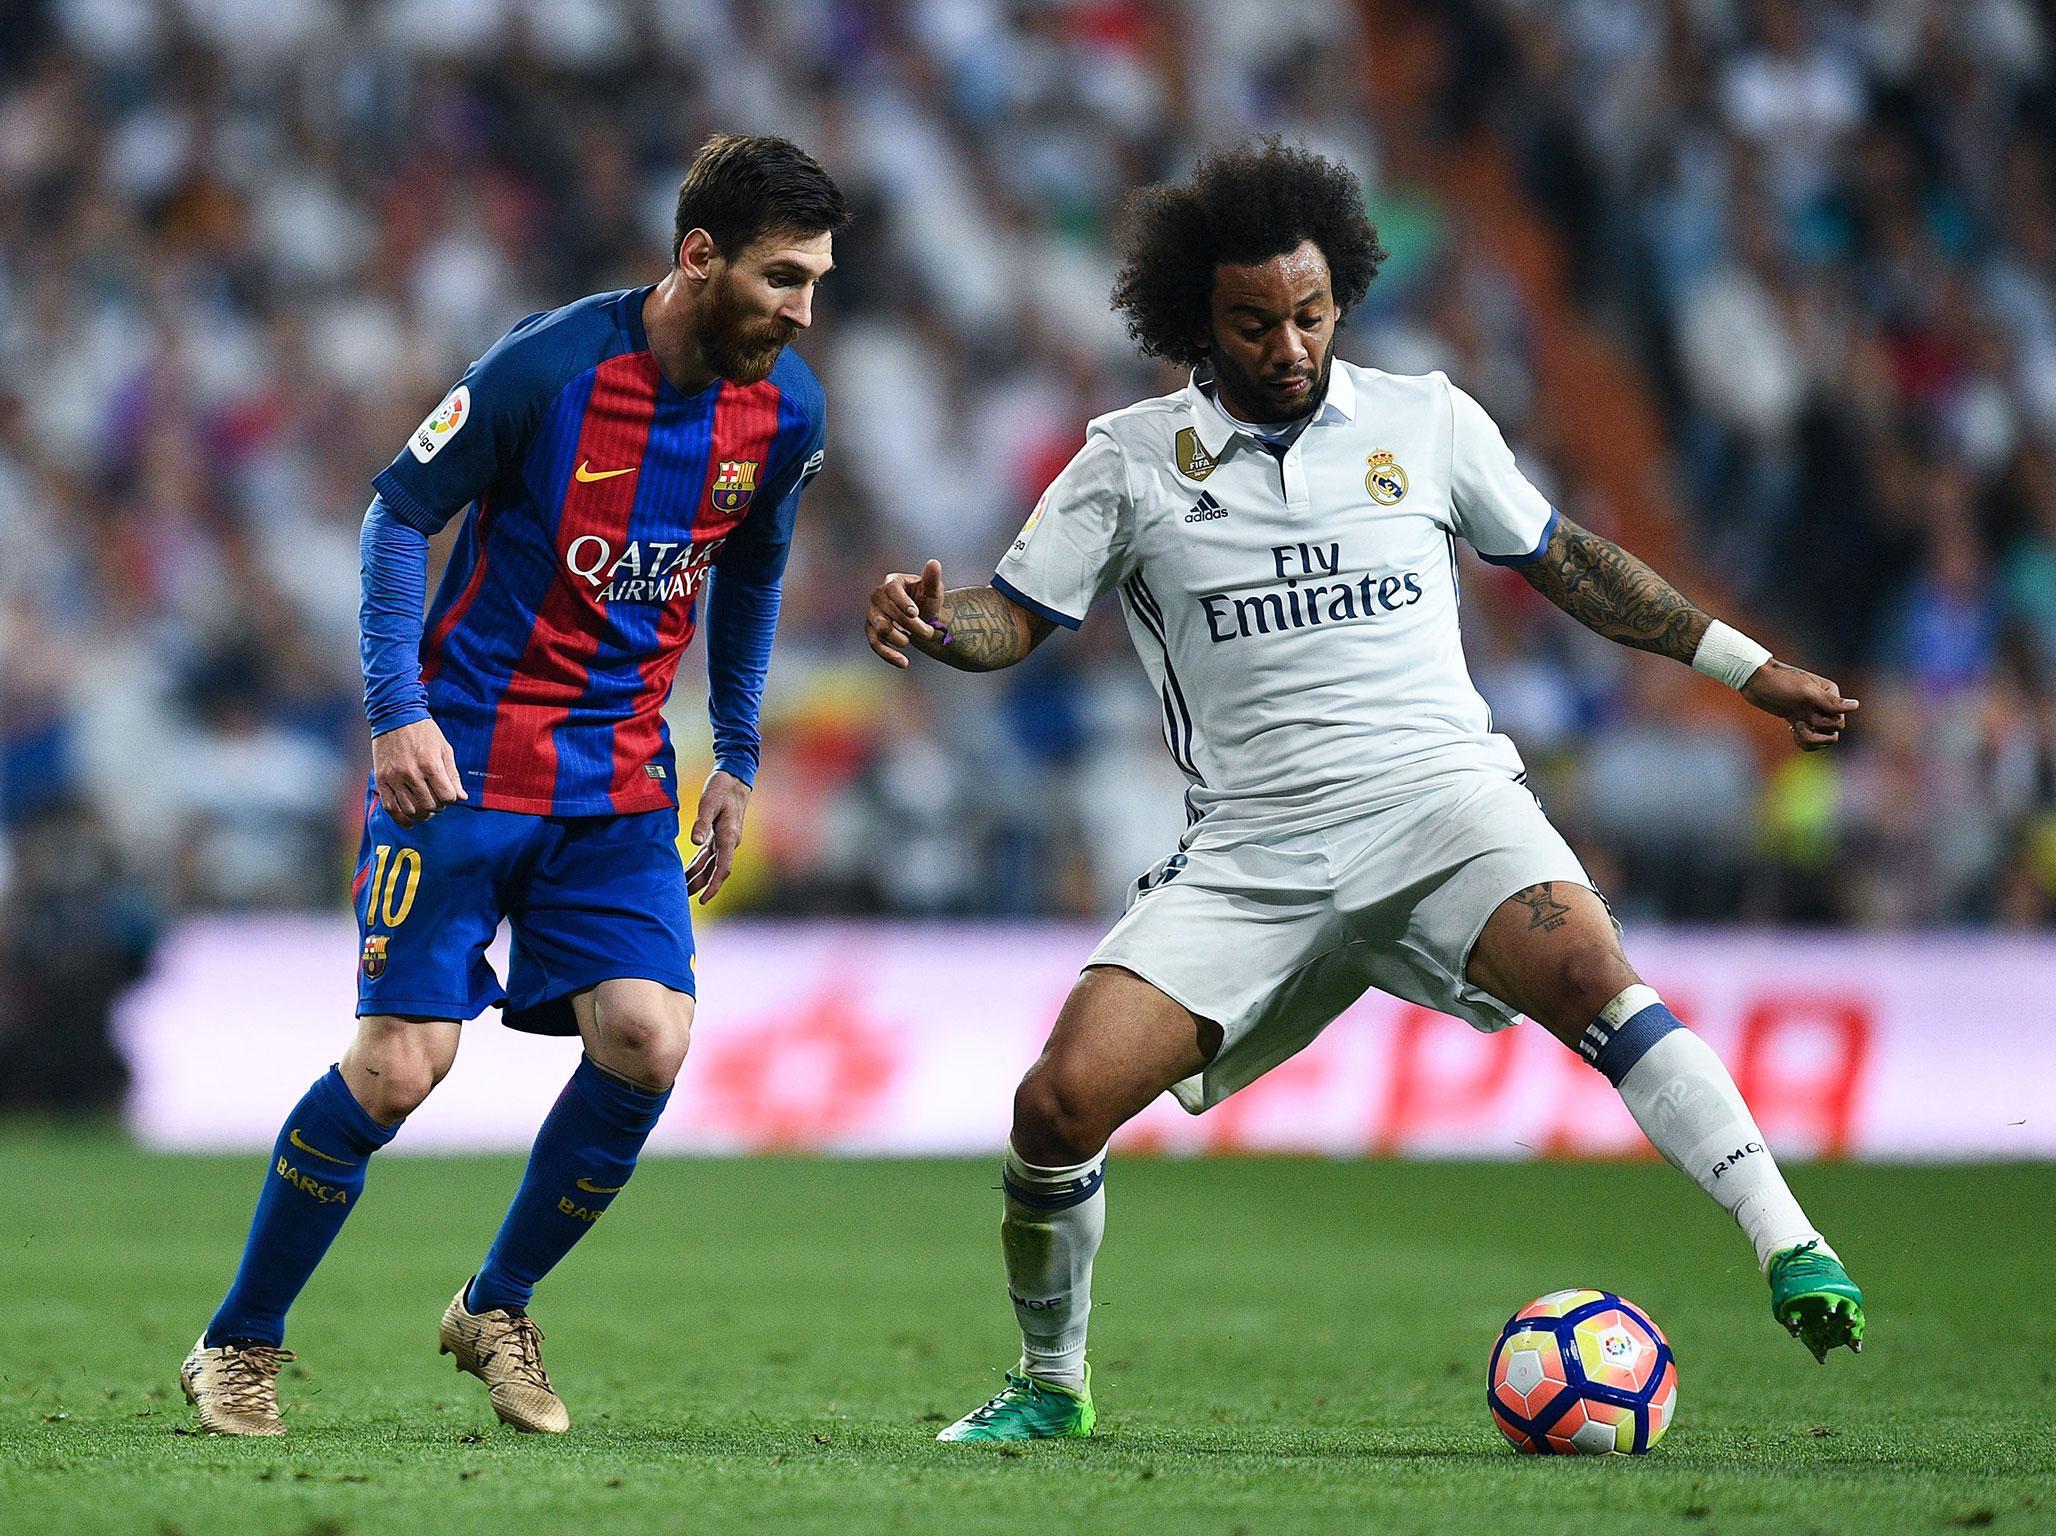 The two great rivals meet once again with La Liga on the line